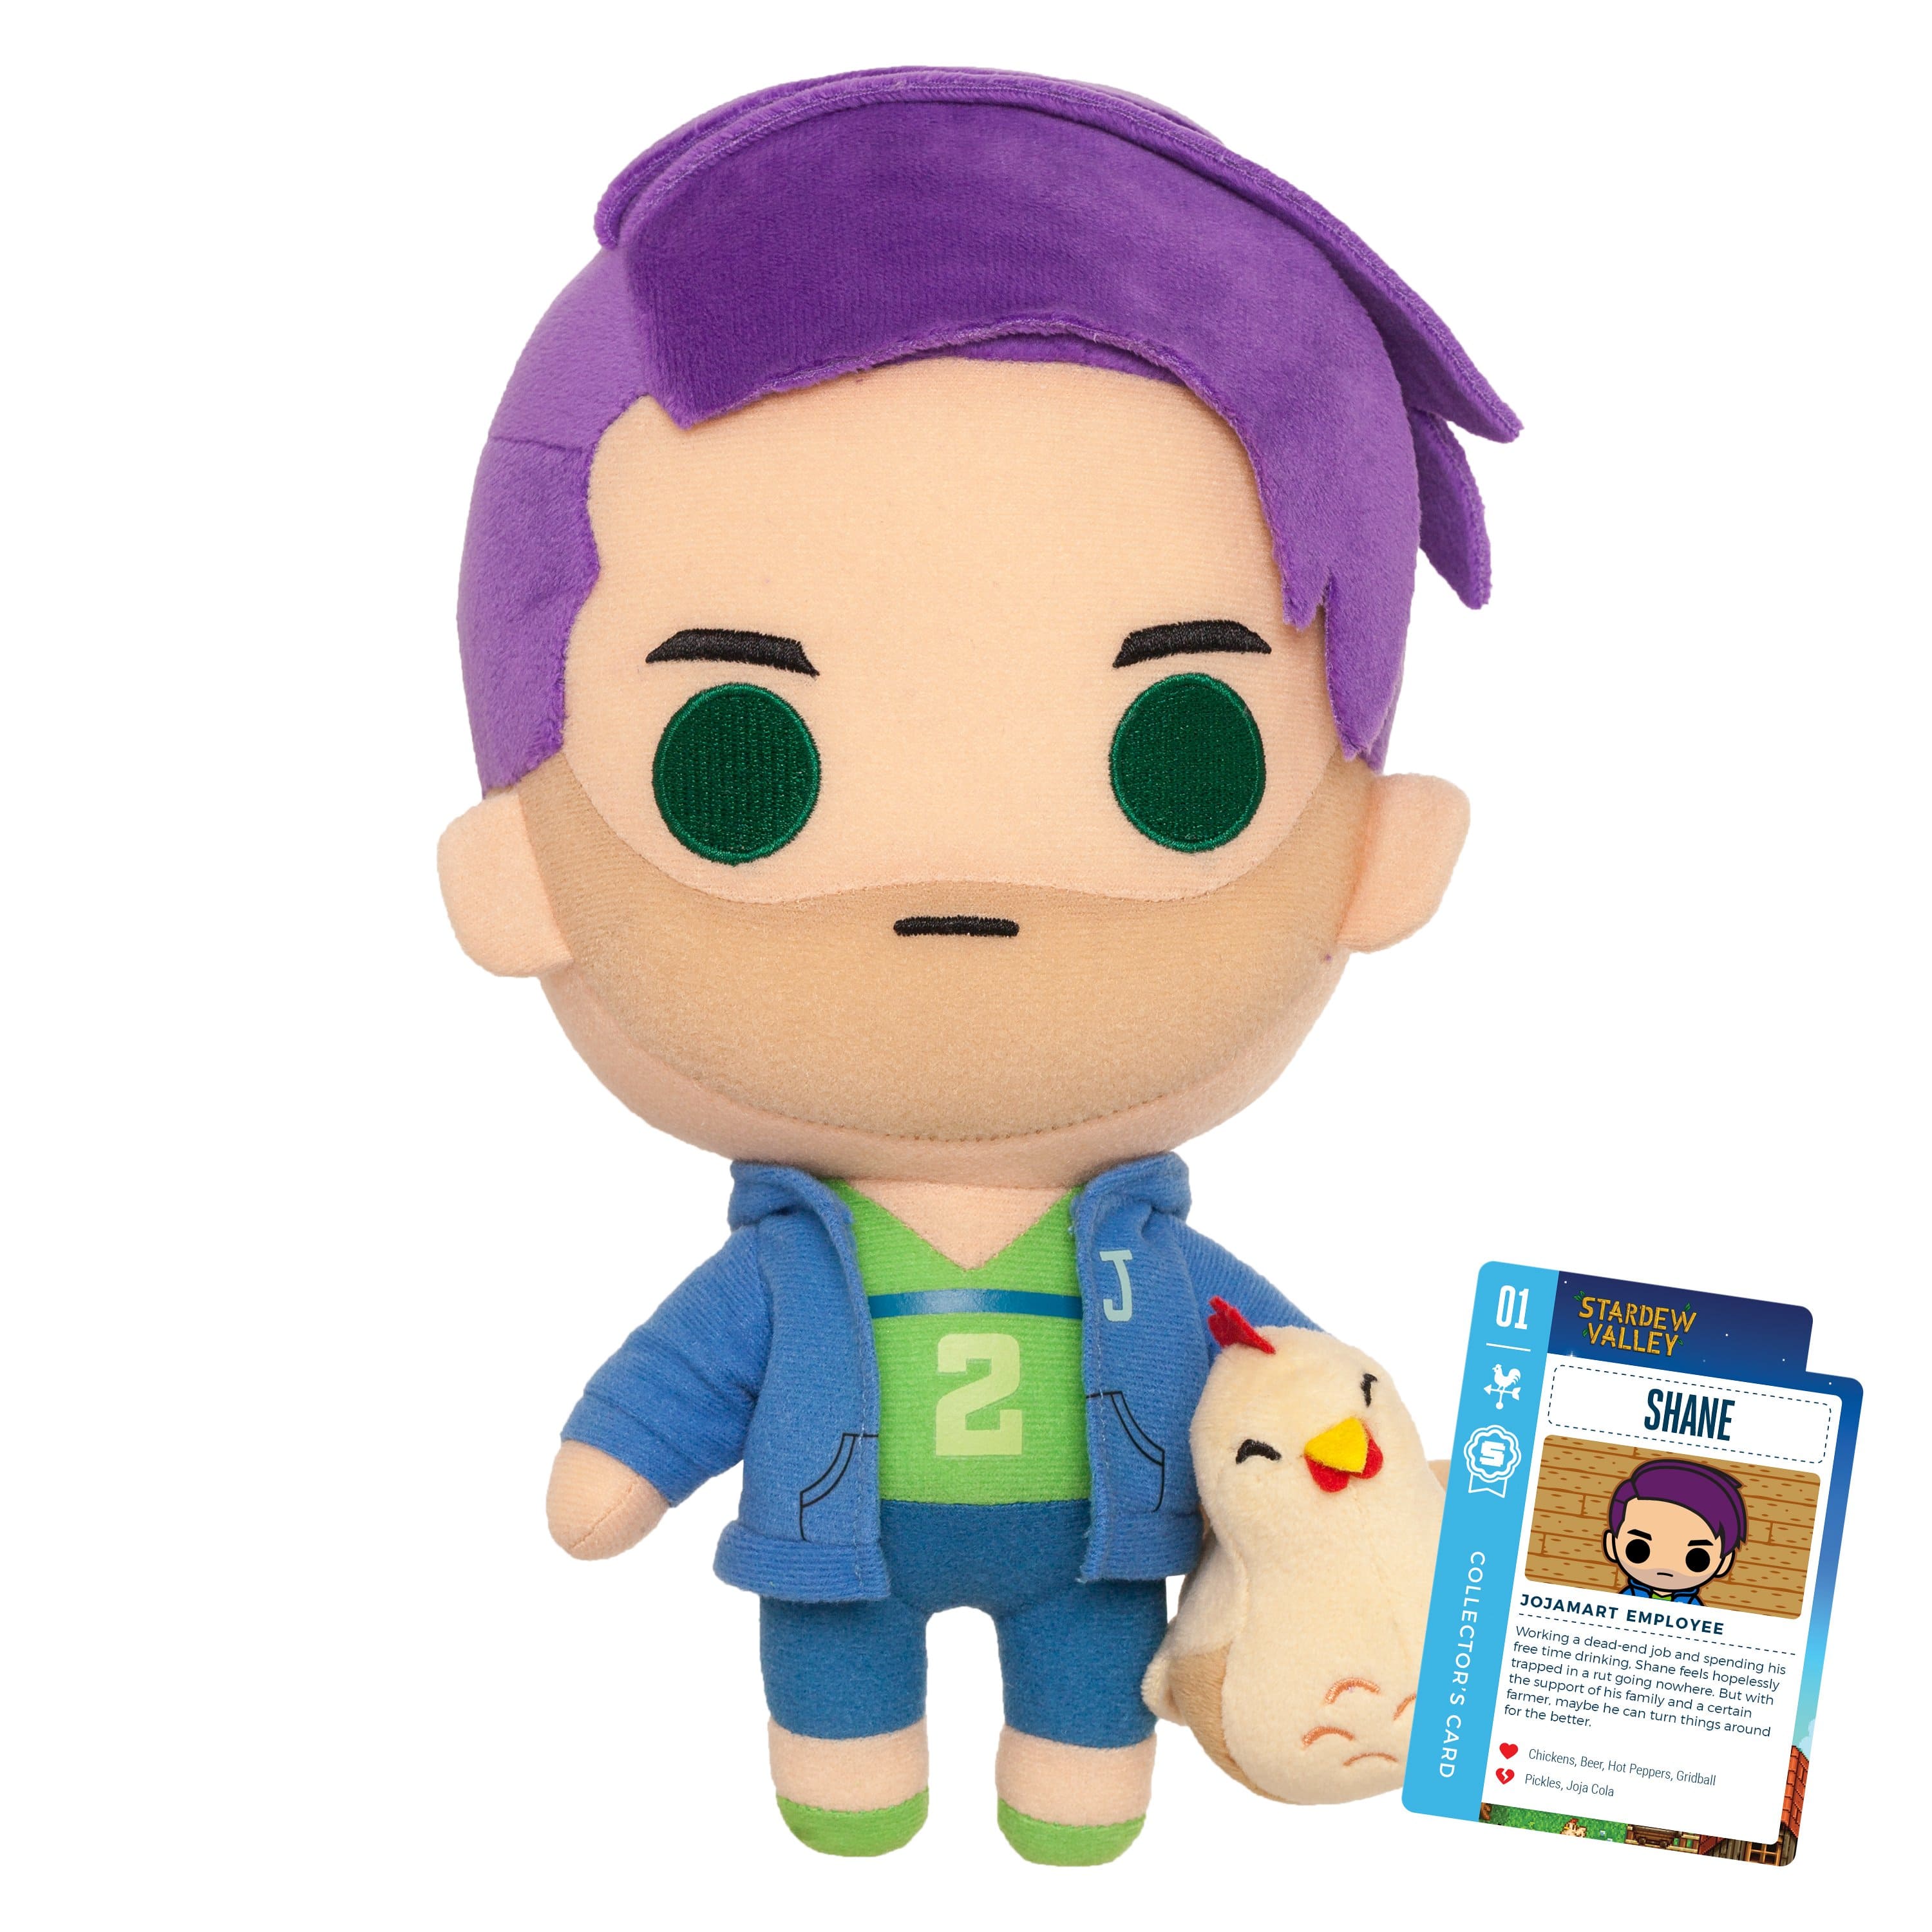 Stardew Valley - Shane Collector's Stuffed Plushie With Collector's Card